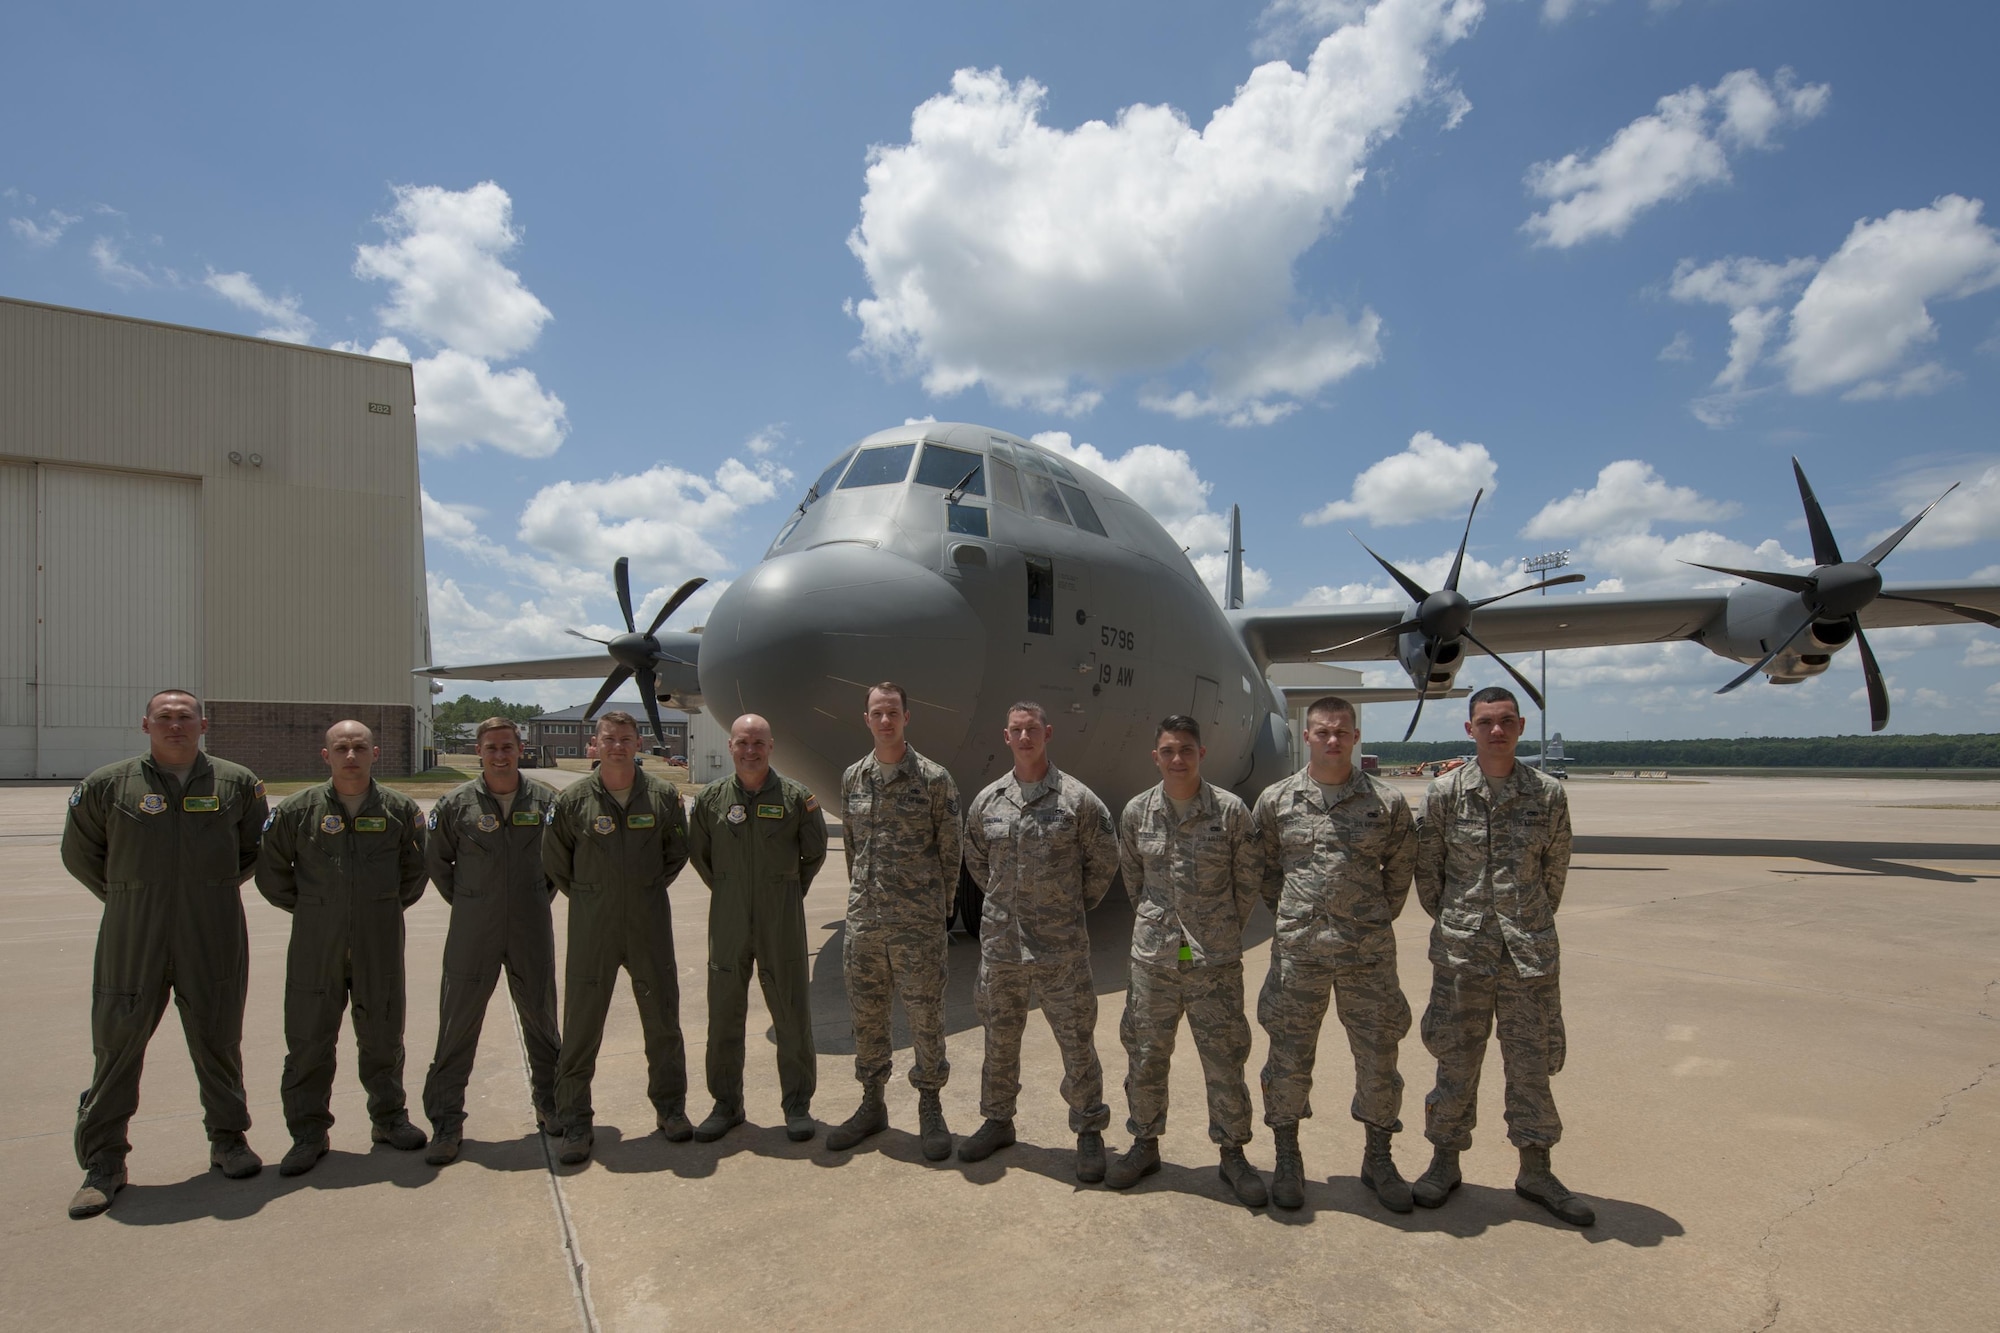 U.S. Air Force Gen. Carlton D. Everhart II, Air Mobility Command commander, center, stands with a crew of Airmen who delivered a C-130J to the 19th Airlift Wing at Little Rock Air Force Base, Ark., June 20, 2016. The aircraft was the final C-130J to be delivered from Lockheed Martine and marks the end of an airframe transition that lasted more than a decade at Little Rock AFB.  (U.S. Air Force photo/Senior Airman Harry Brexel)